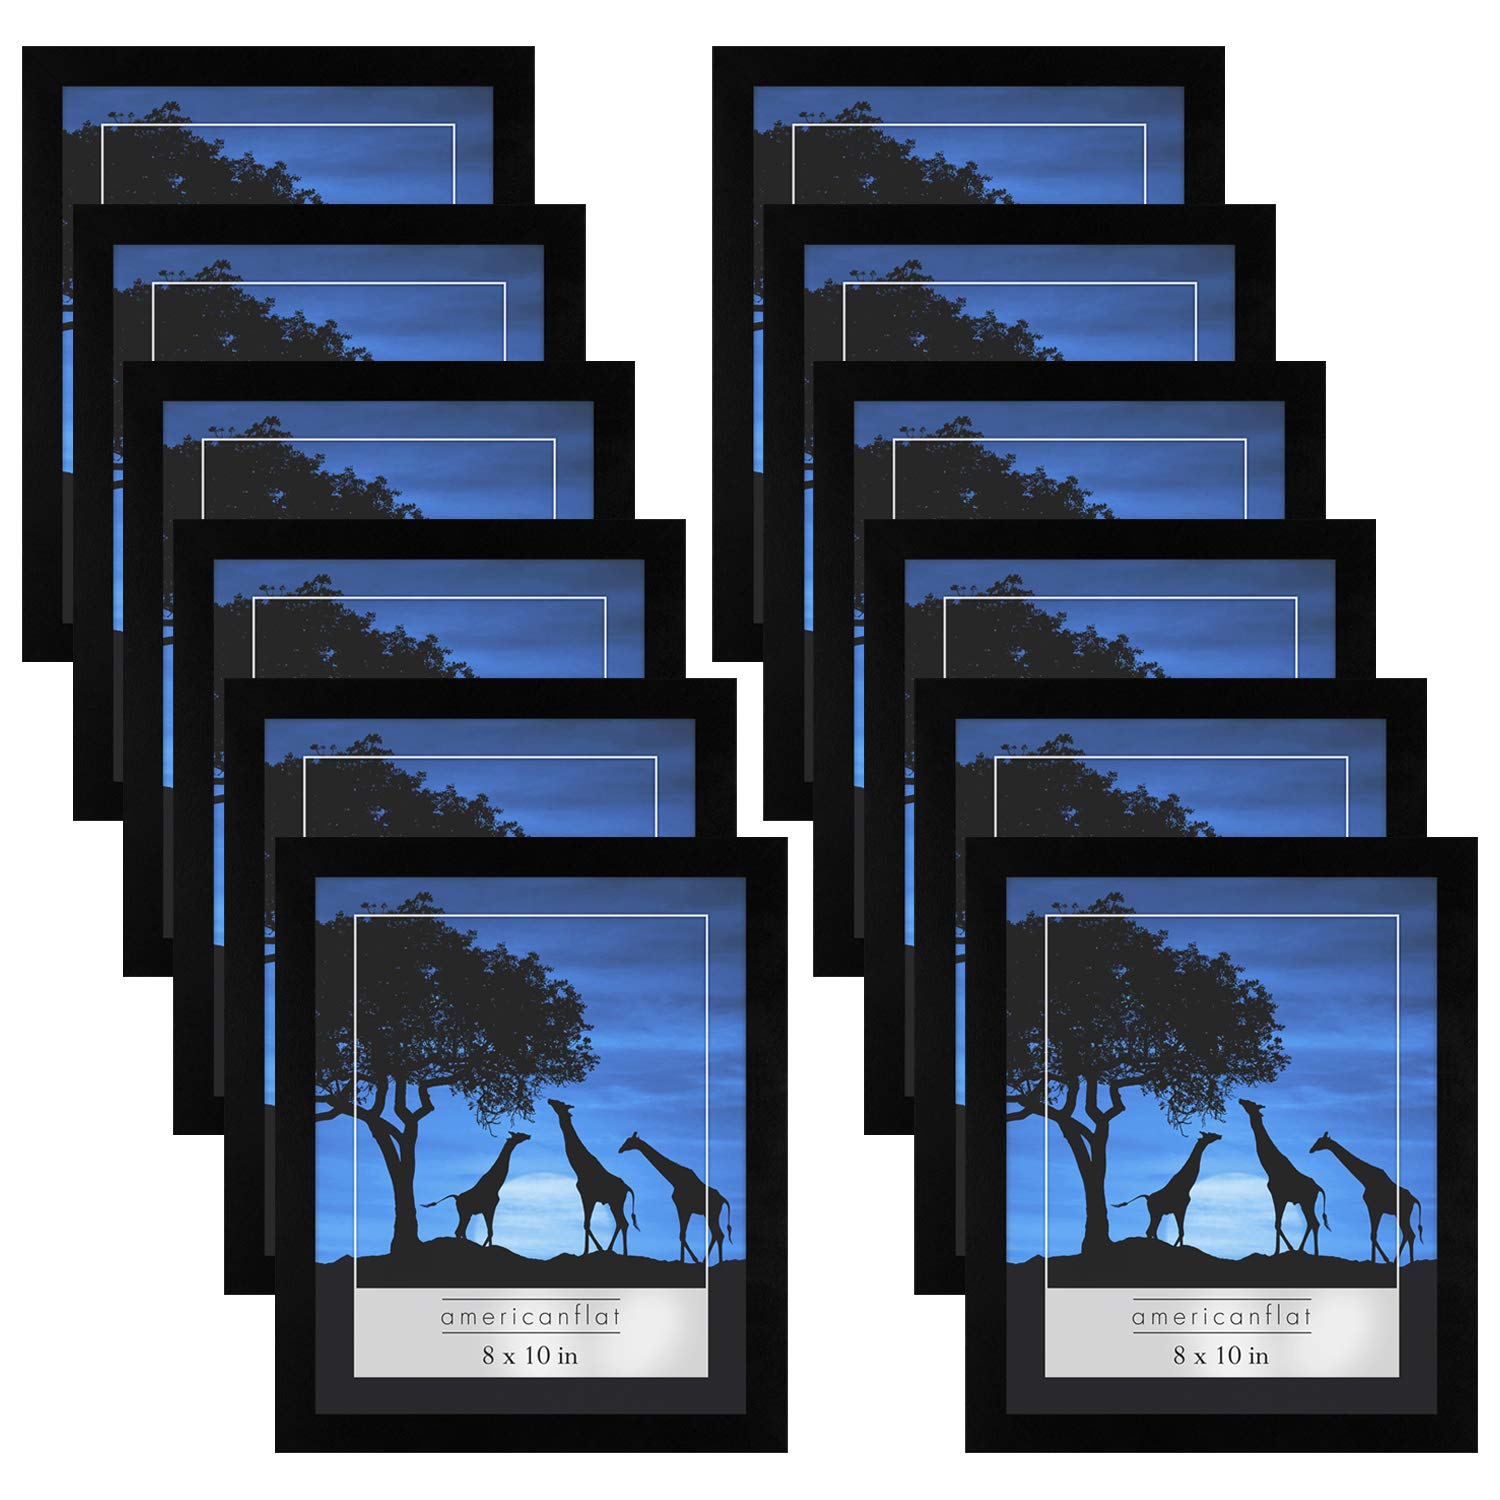 Picture / Photo Frames, Wooden Desktop Display Stand Bulk Set w/ Easel-Back  Hook - 4x6 Inch (Gray, 1-Pack) Wall Hanging System for Pre-Cut Board Mat  Art Print Poster Document Artwork 